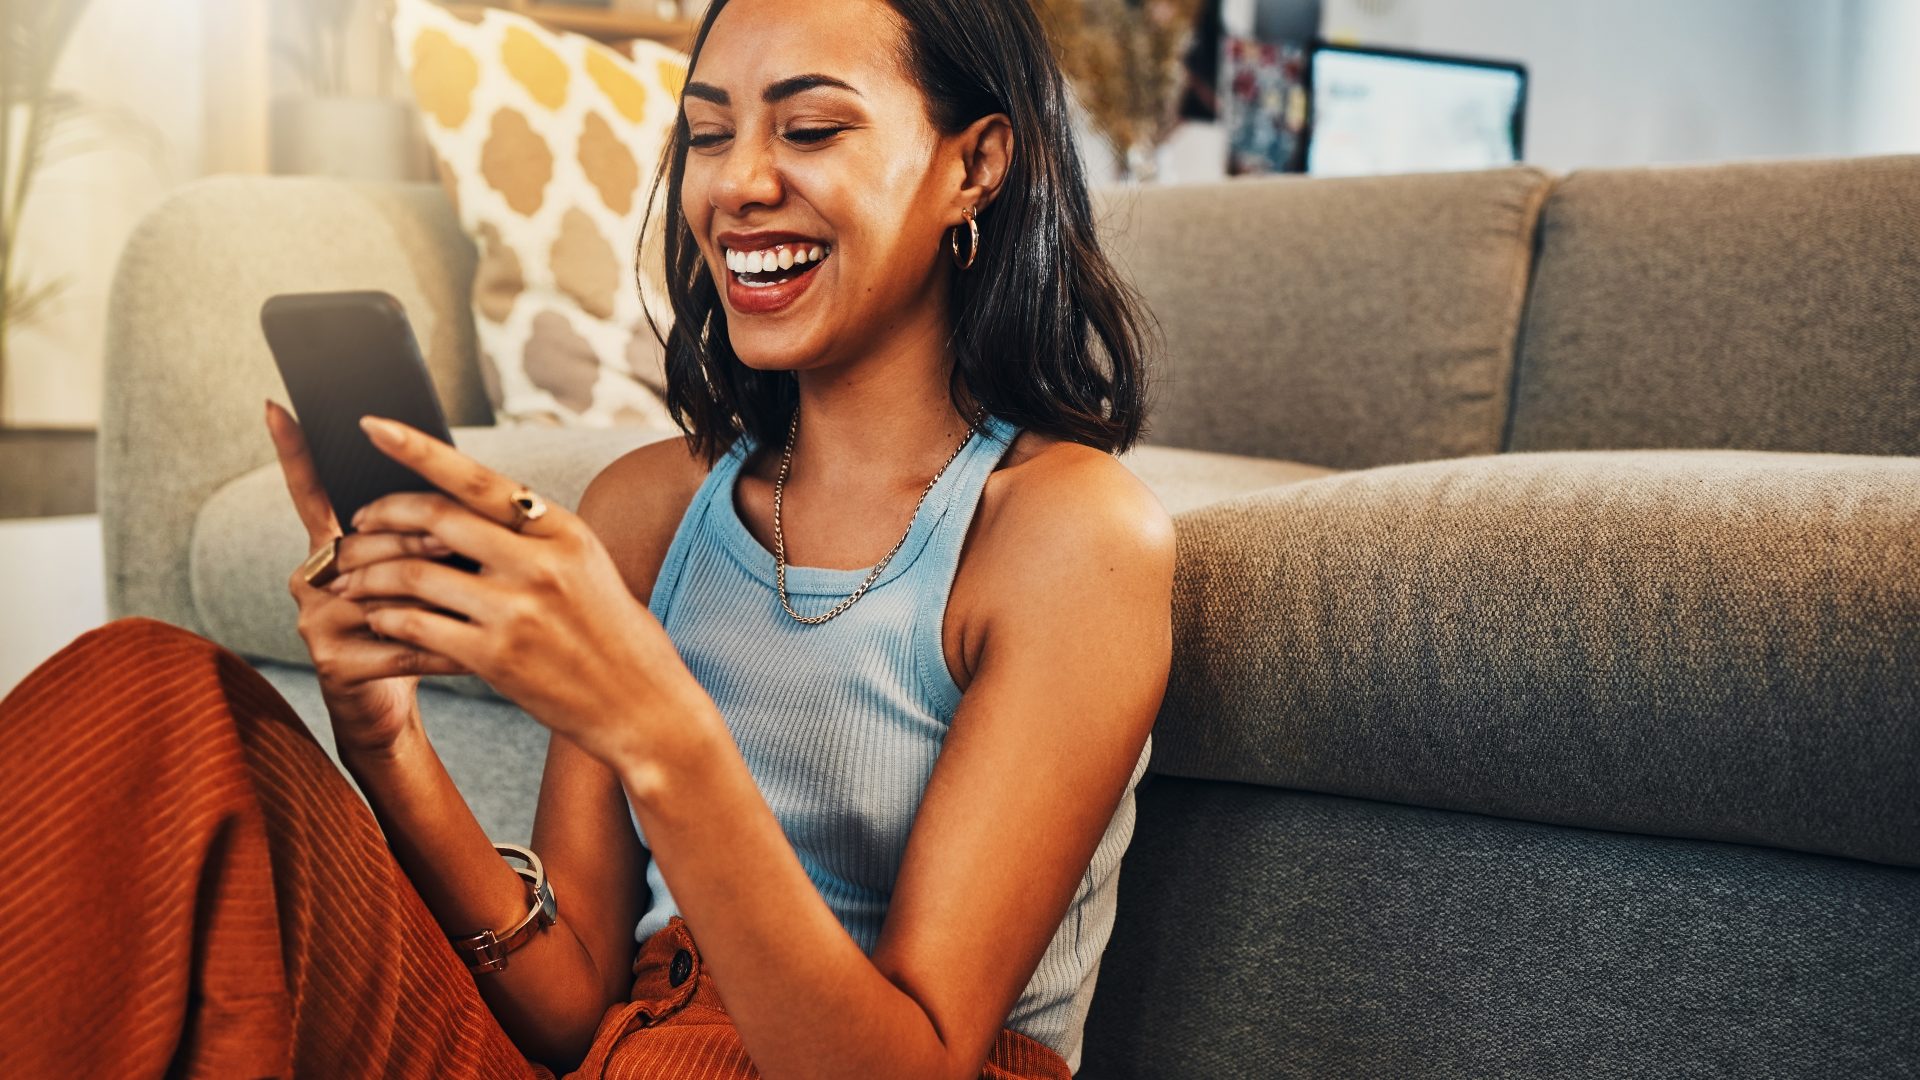 Beautiful mixed race woman browsing internet on cellphone in home living room. Happy hispanic sitting alone on floor in lounge and using technology to network. Laughing while scrolling on social media